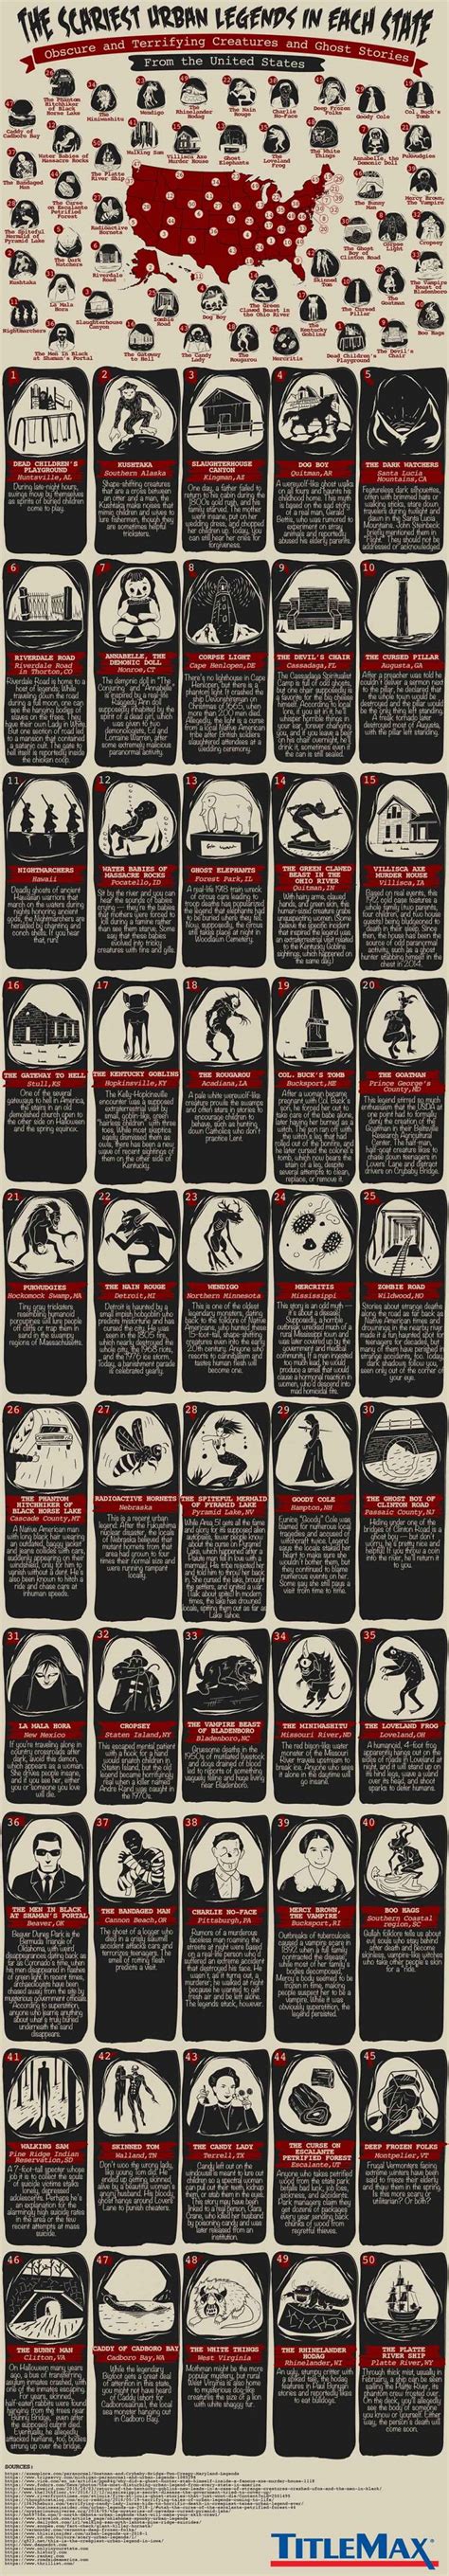 The Scariest Urban Legends In Each State Infographic